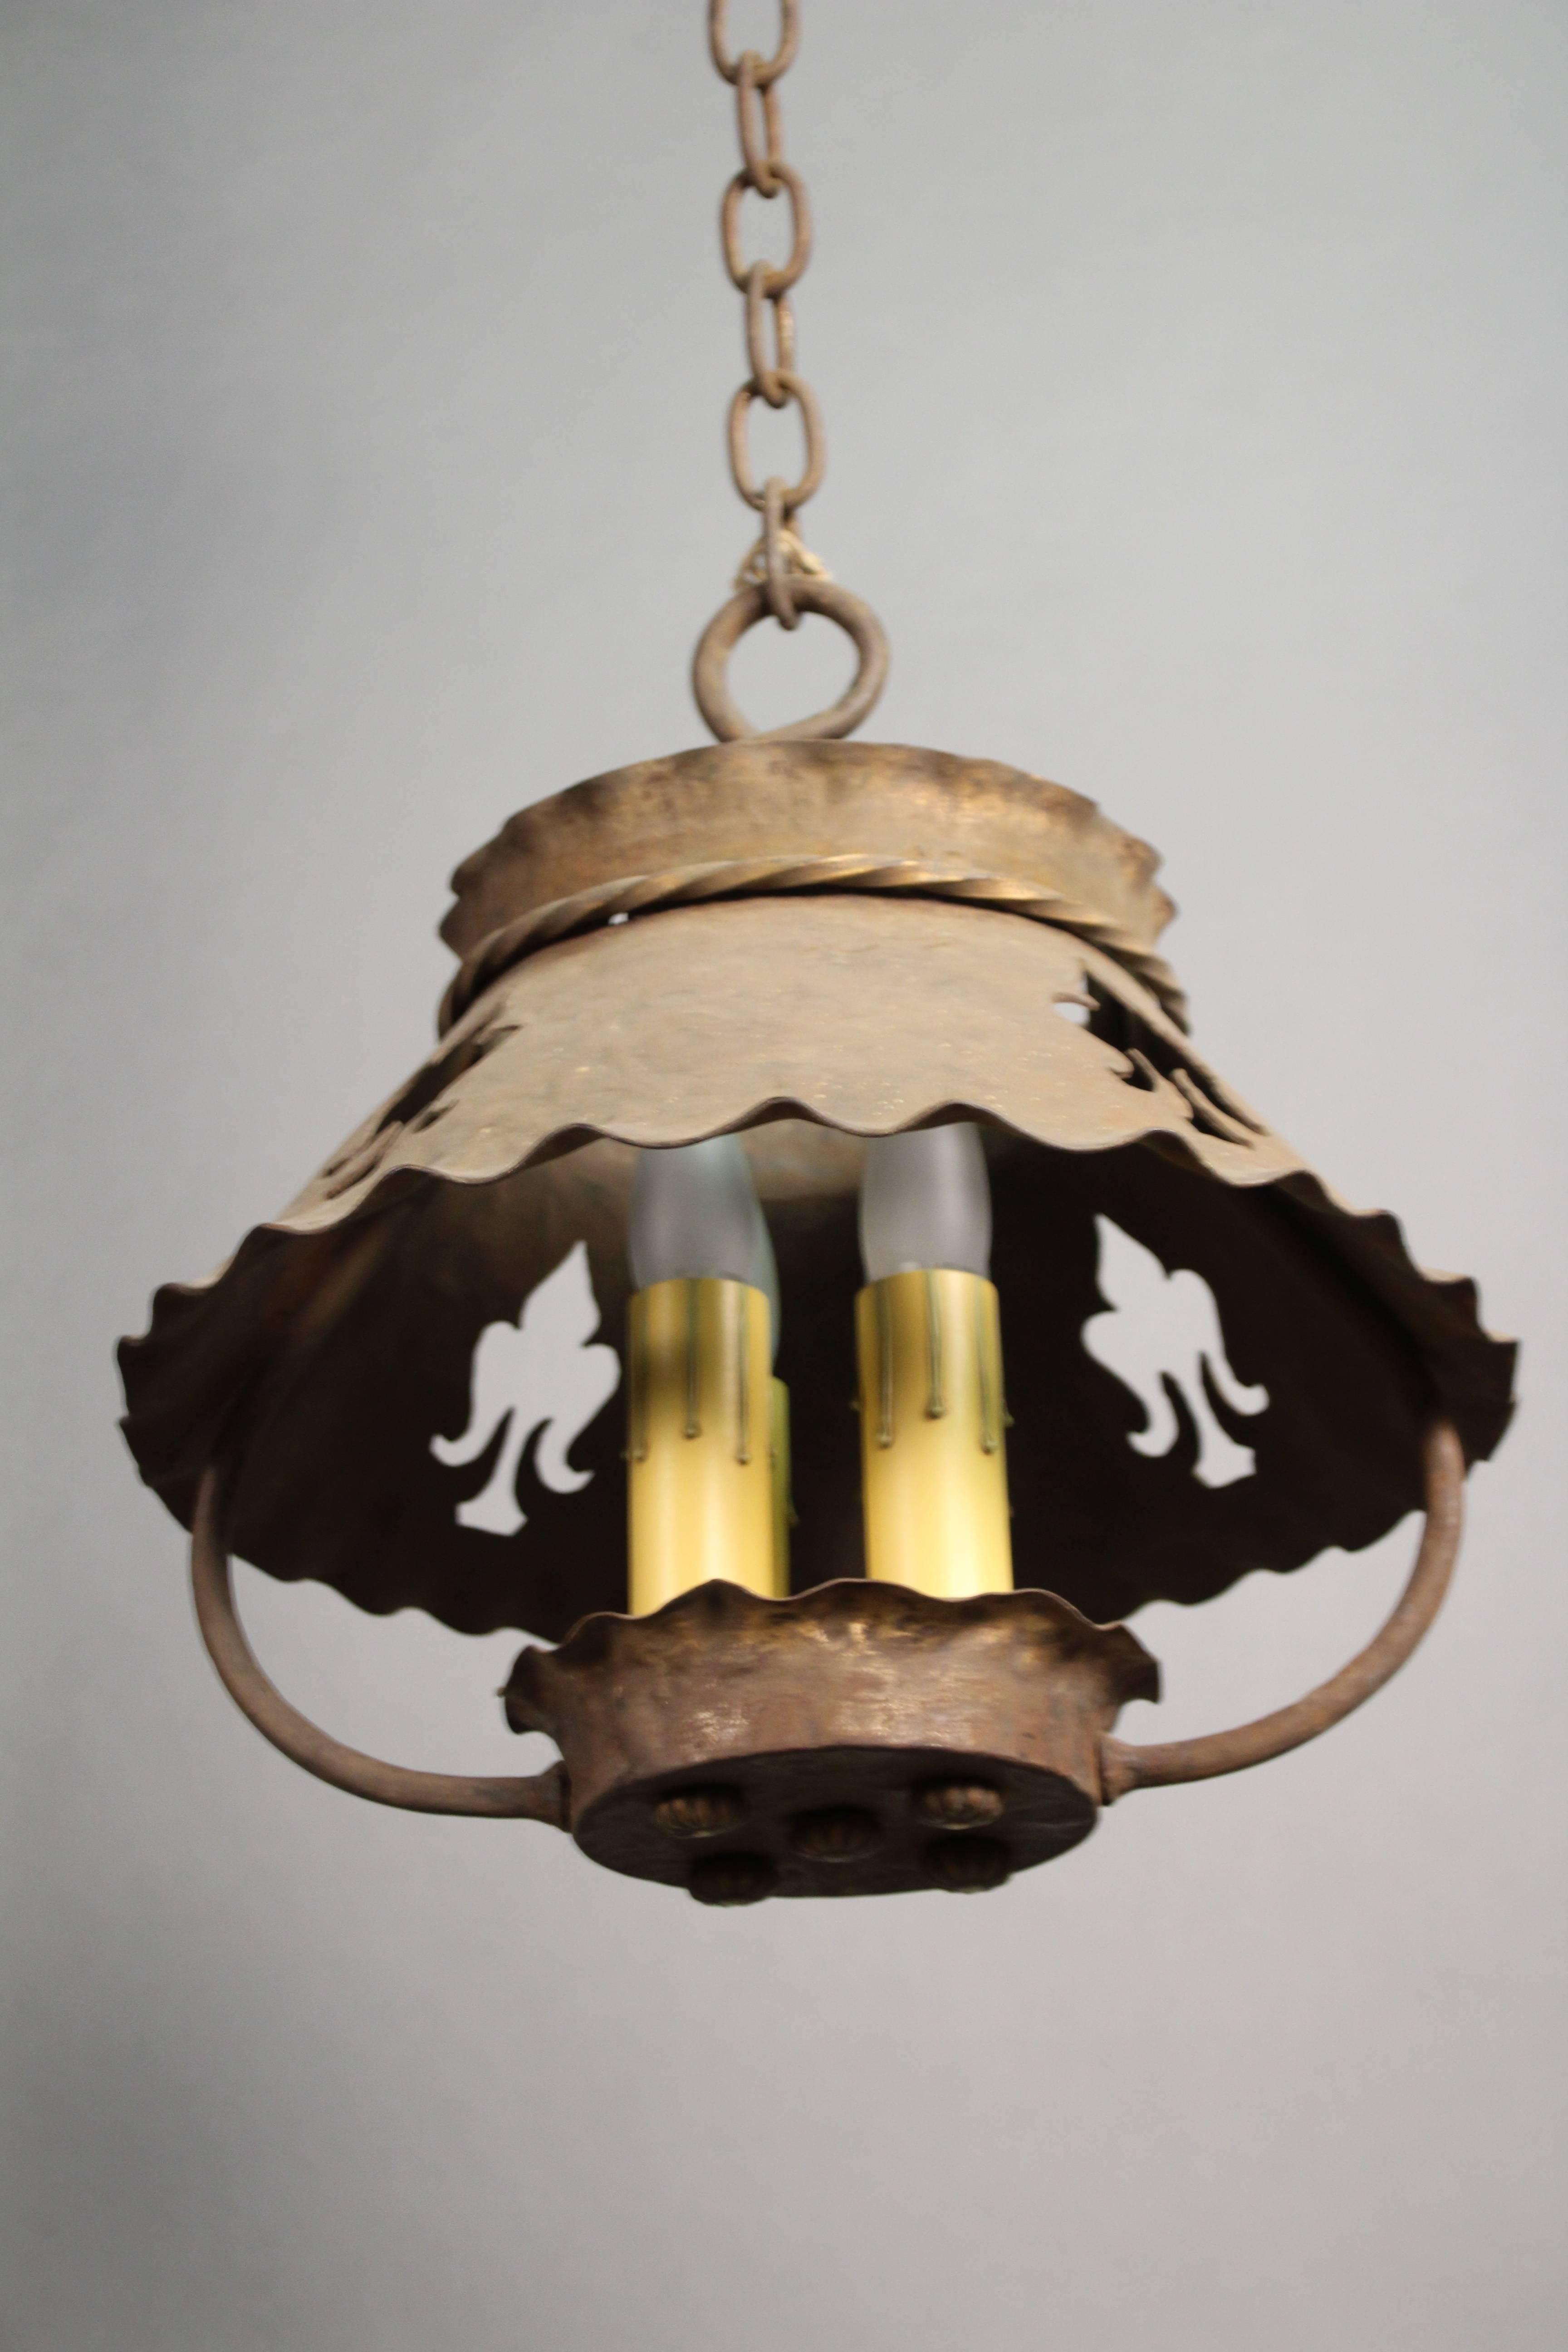 Iron chandelier with cut outs, circa 1930s. Original finish. 14.25